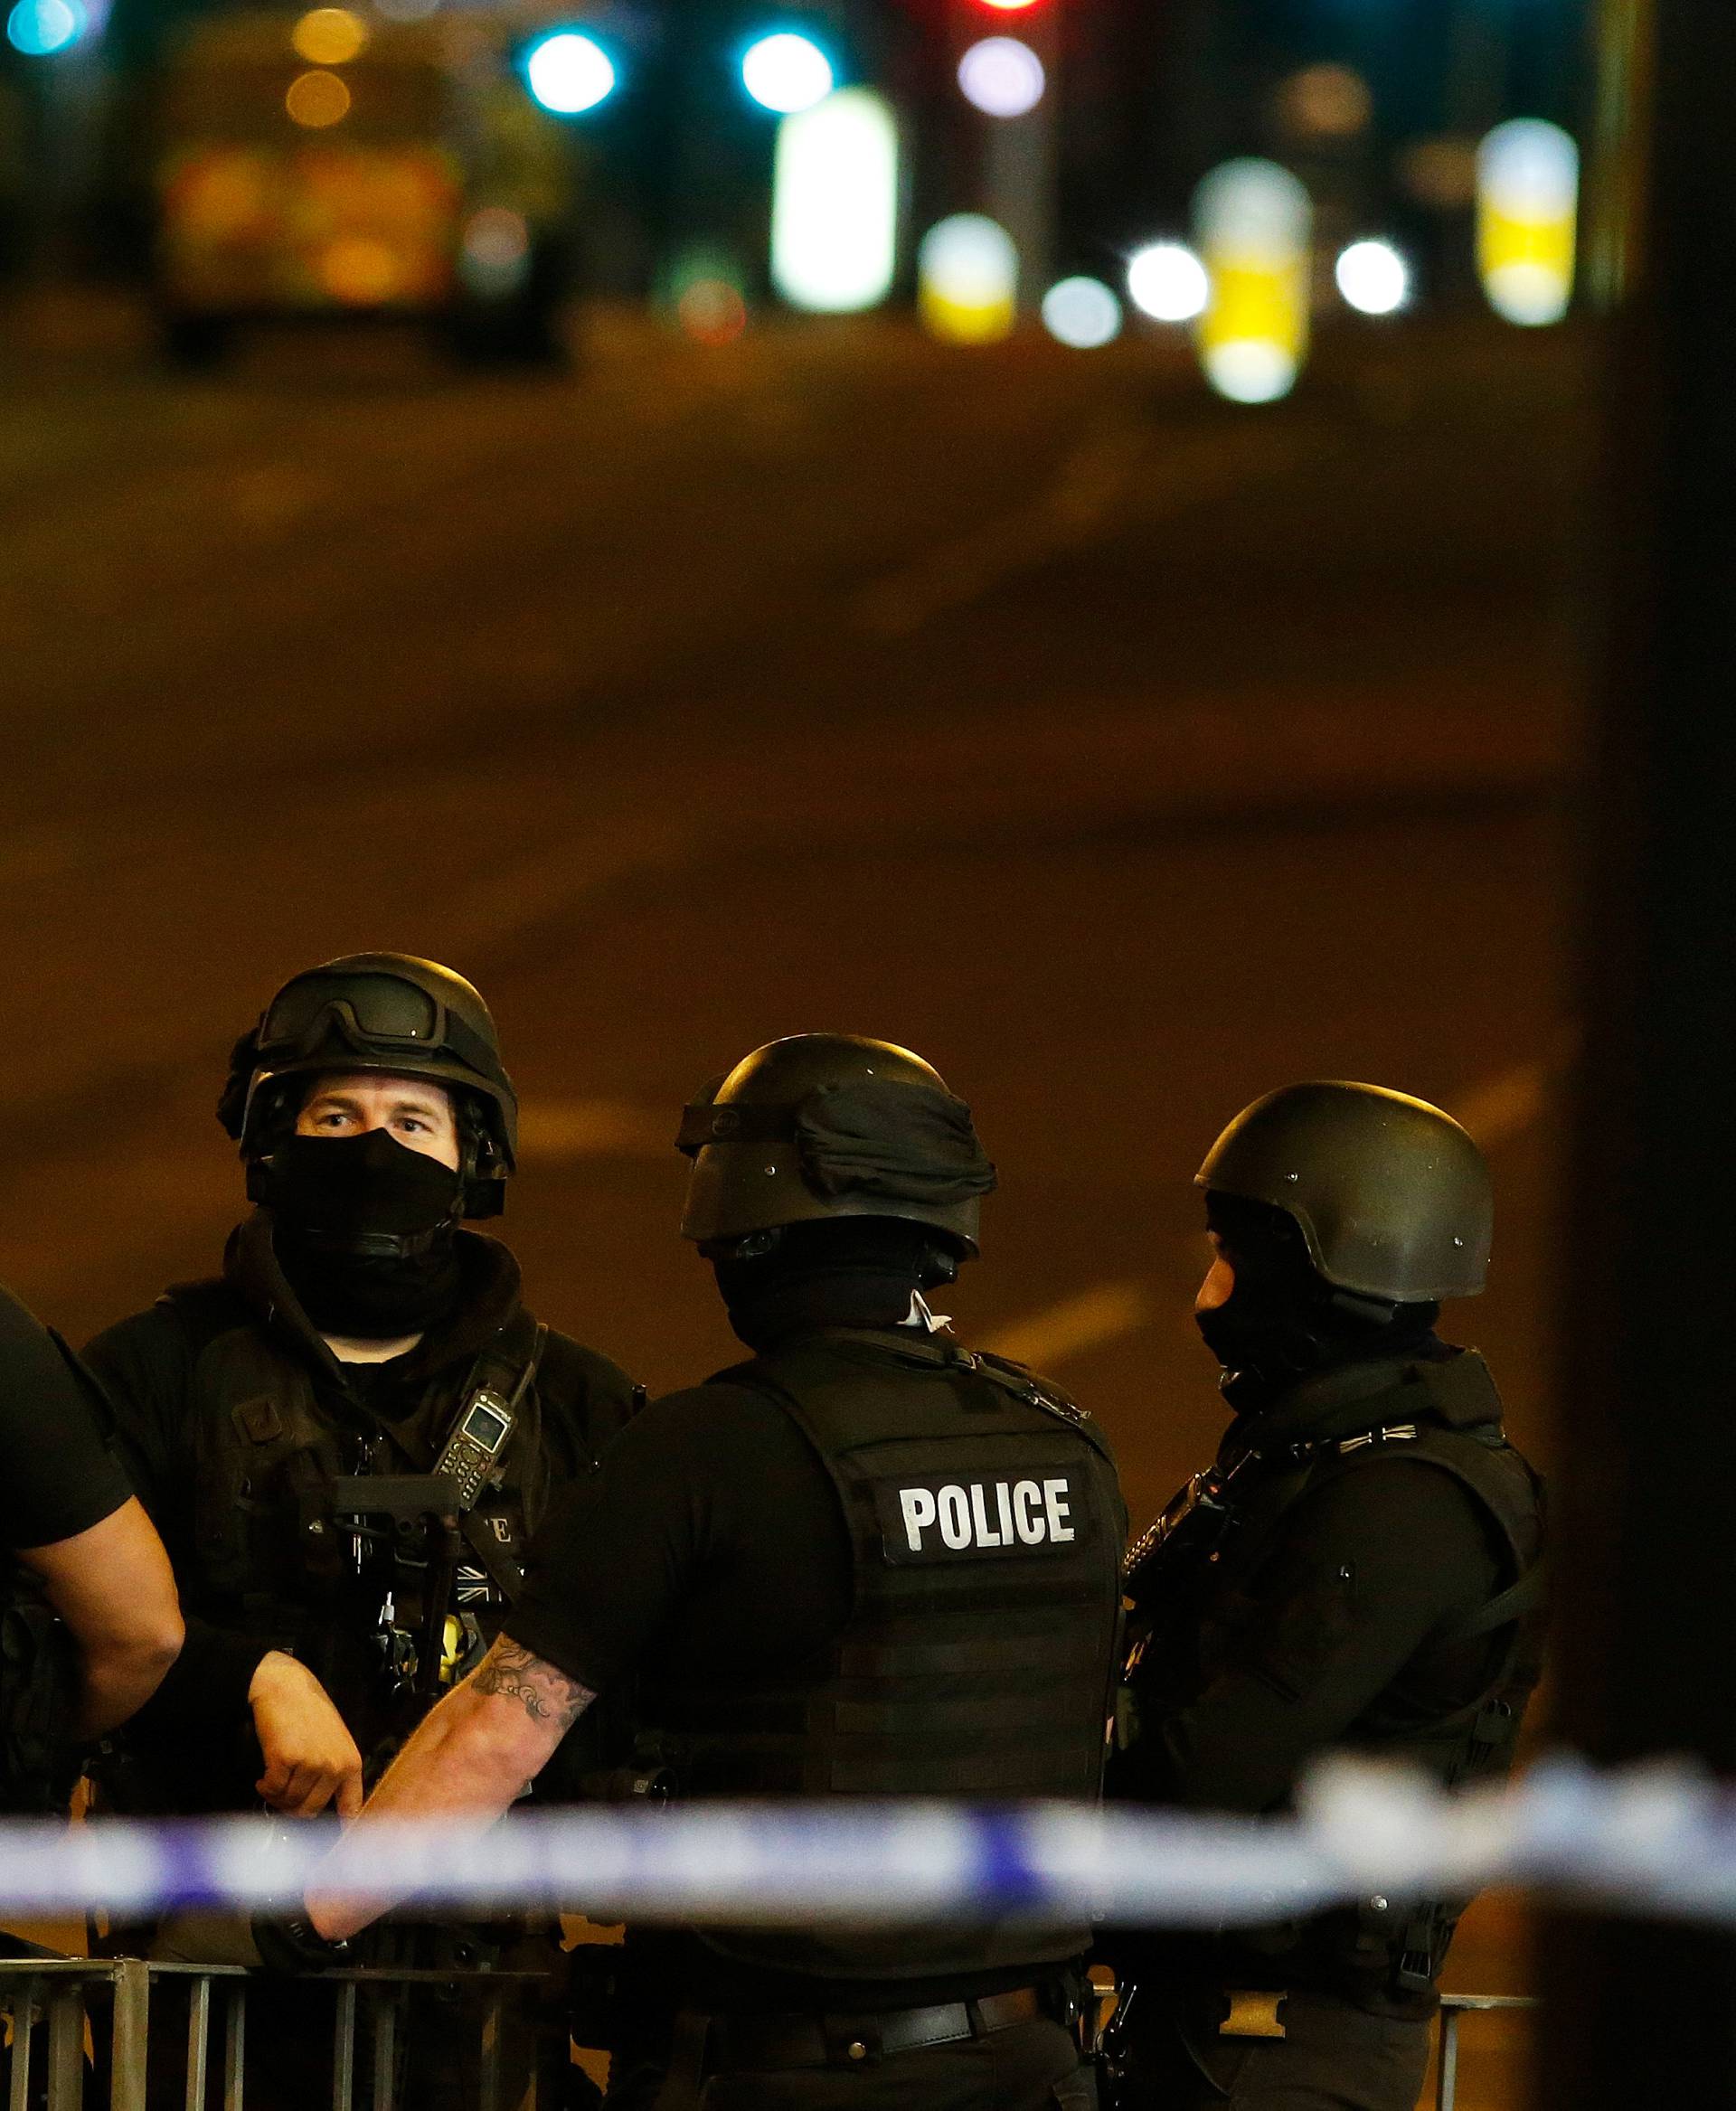 Armed police officers stand near the Manchester Arena, where U.S. singer Ariana Grande had been performing, in Manchester, northern England, Britain